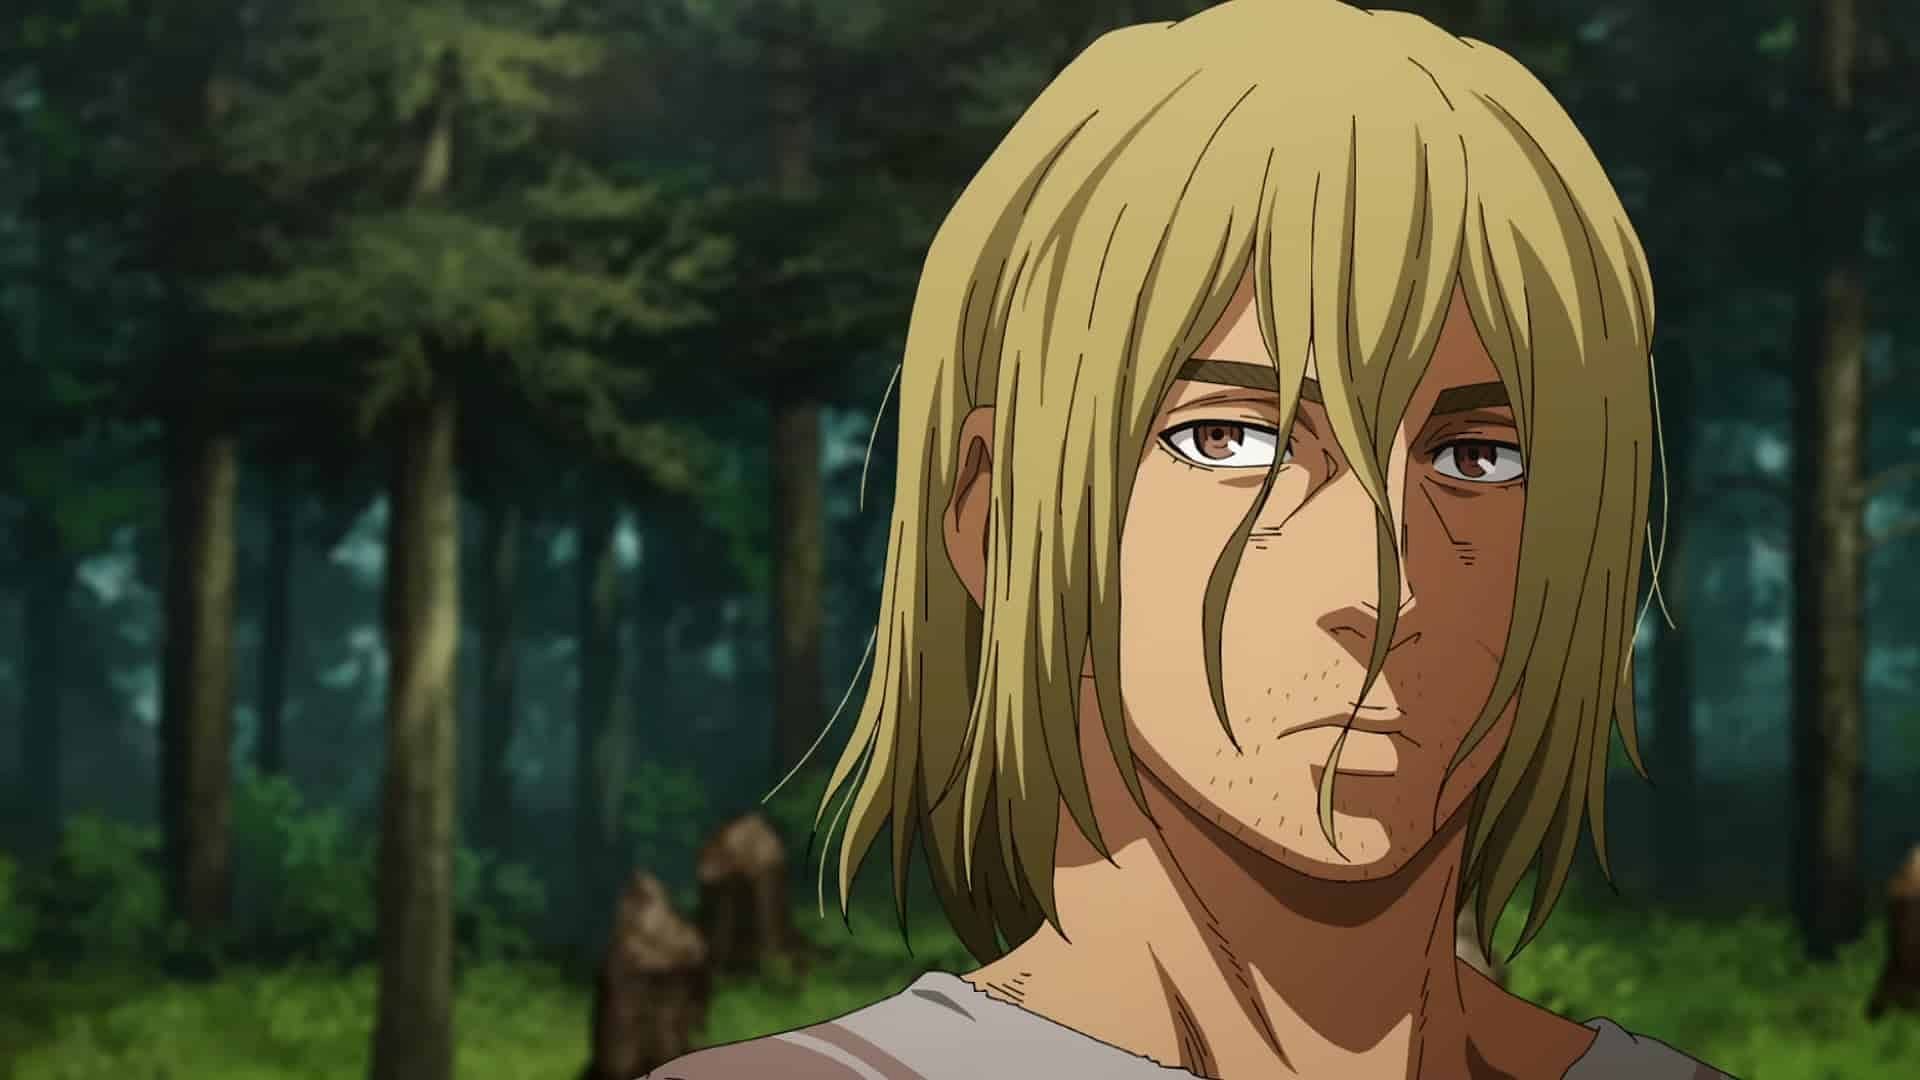 Vinland Saga Season 2 premiered and also revealed the episode count earlier  today: 24 episodes. That's sooner than we expected, but no one…